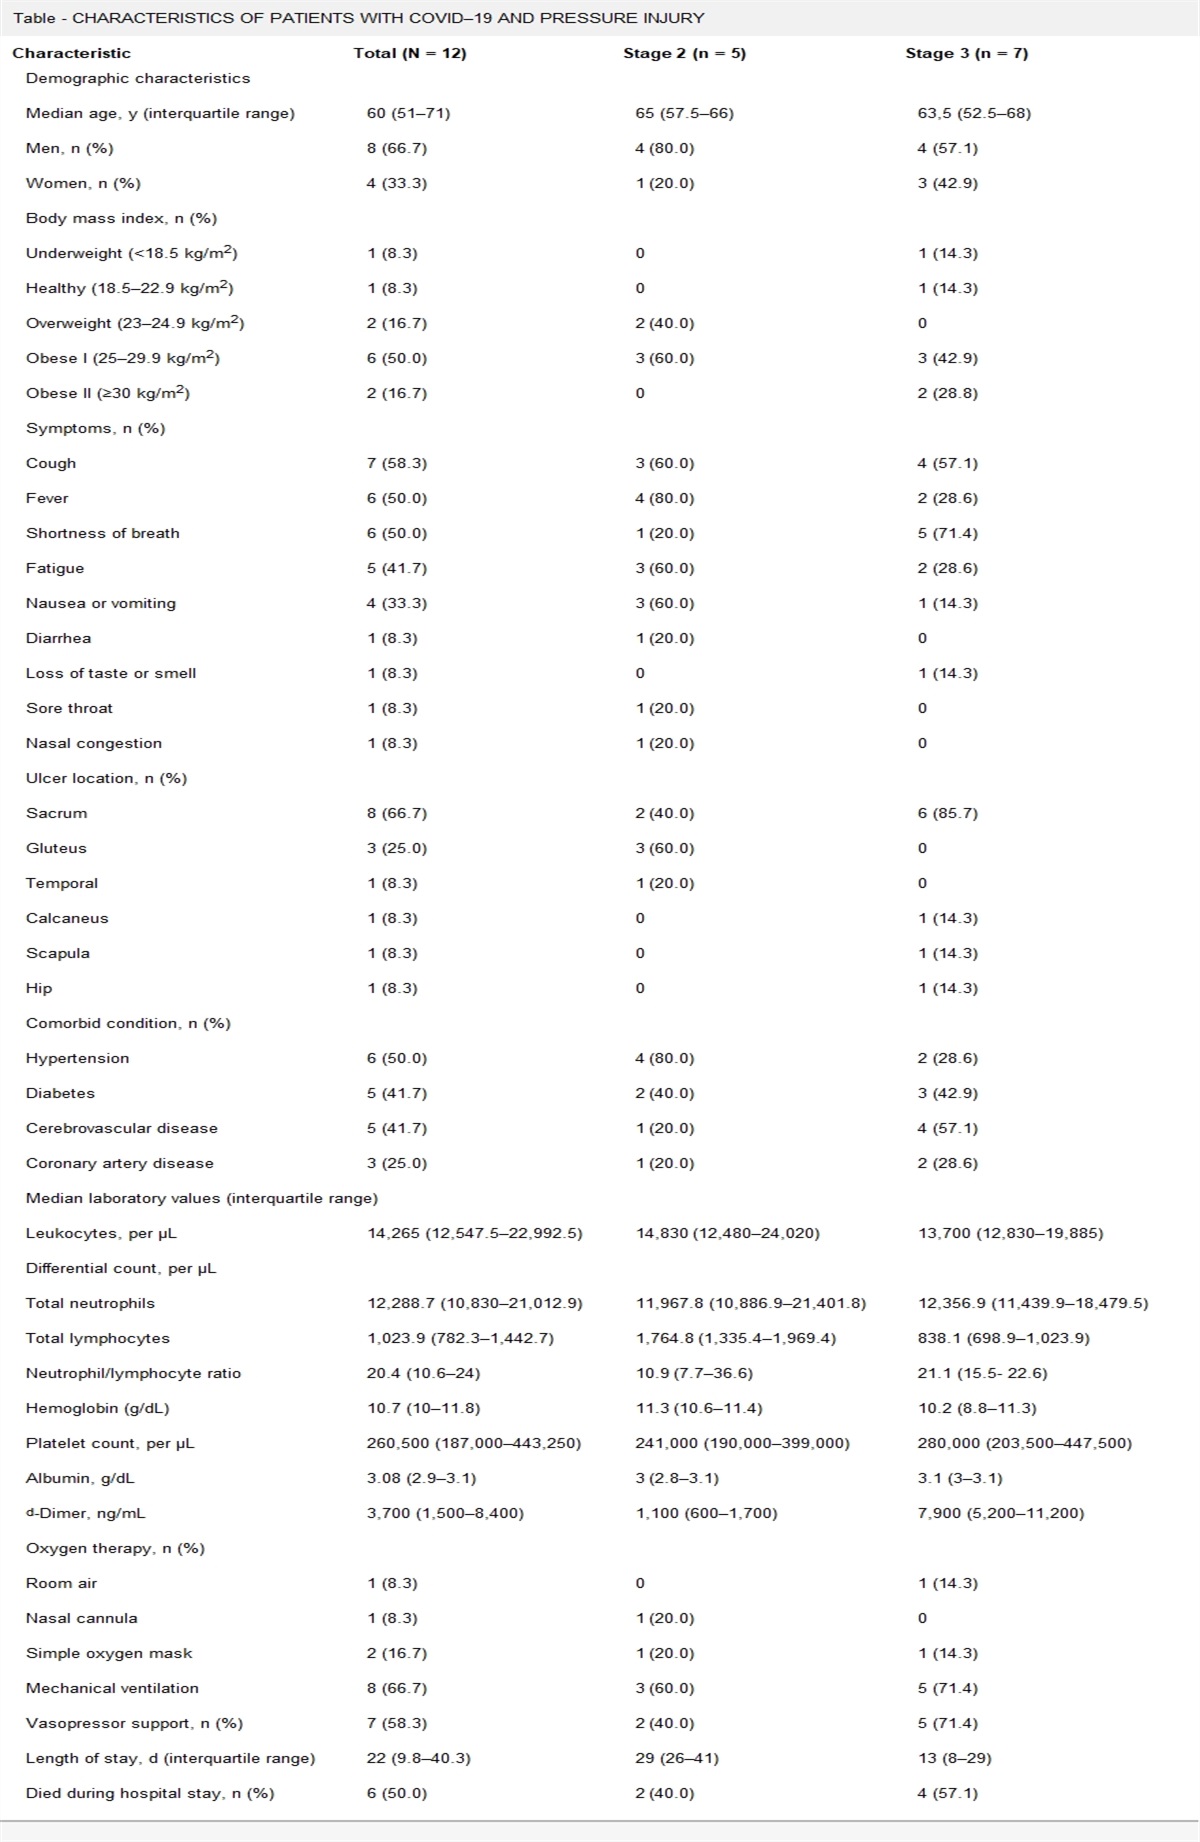 Characteristics of Patients with Pressure Injuries in a COVID-19 Referral Hospital